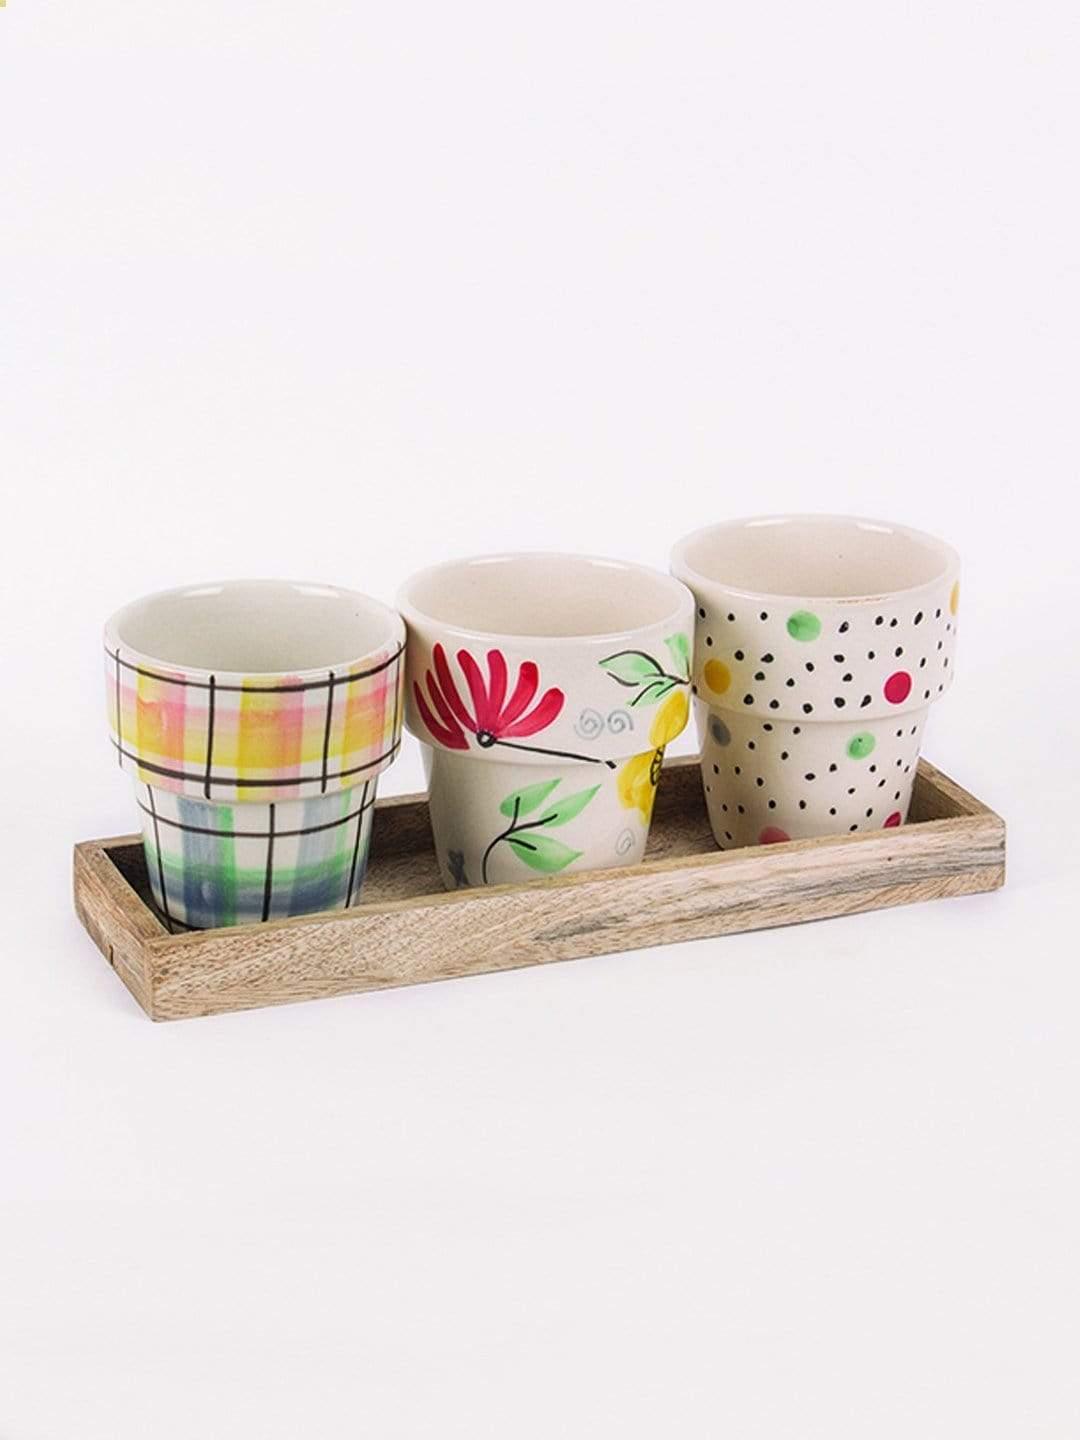 Miss Sunshine Planters With Wooden Tray -set Of 3Material: Ceramic &amp; Wood
Dimensions: 3"D inch x 3.5"H inch.

 Miss Sunshine Planters